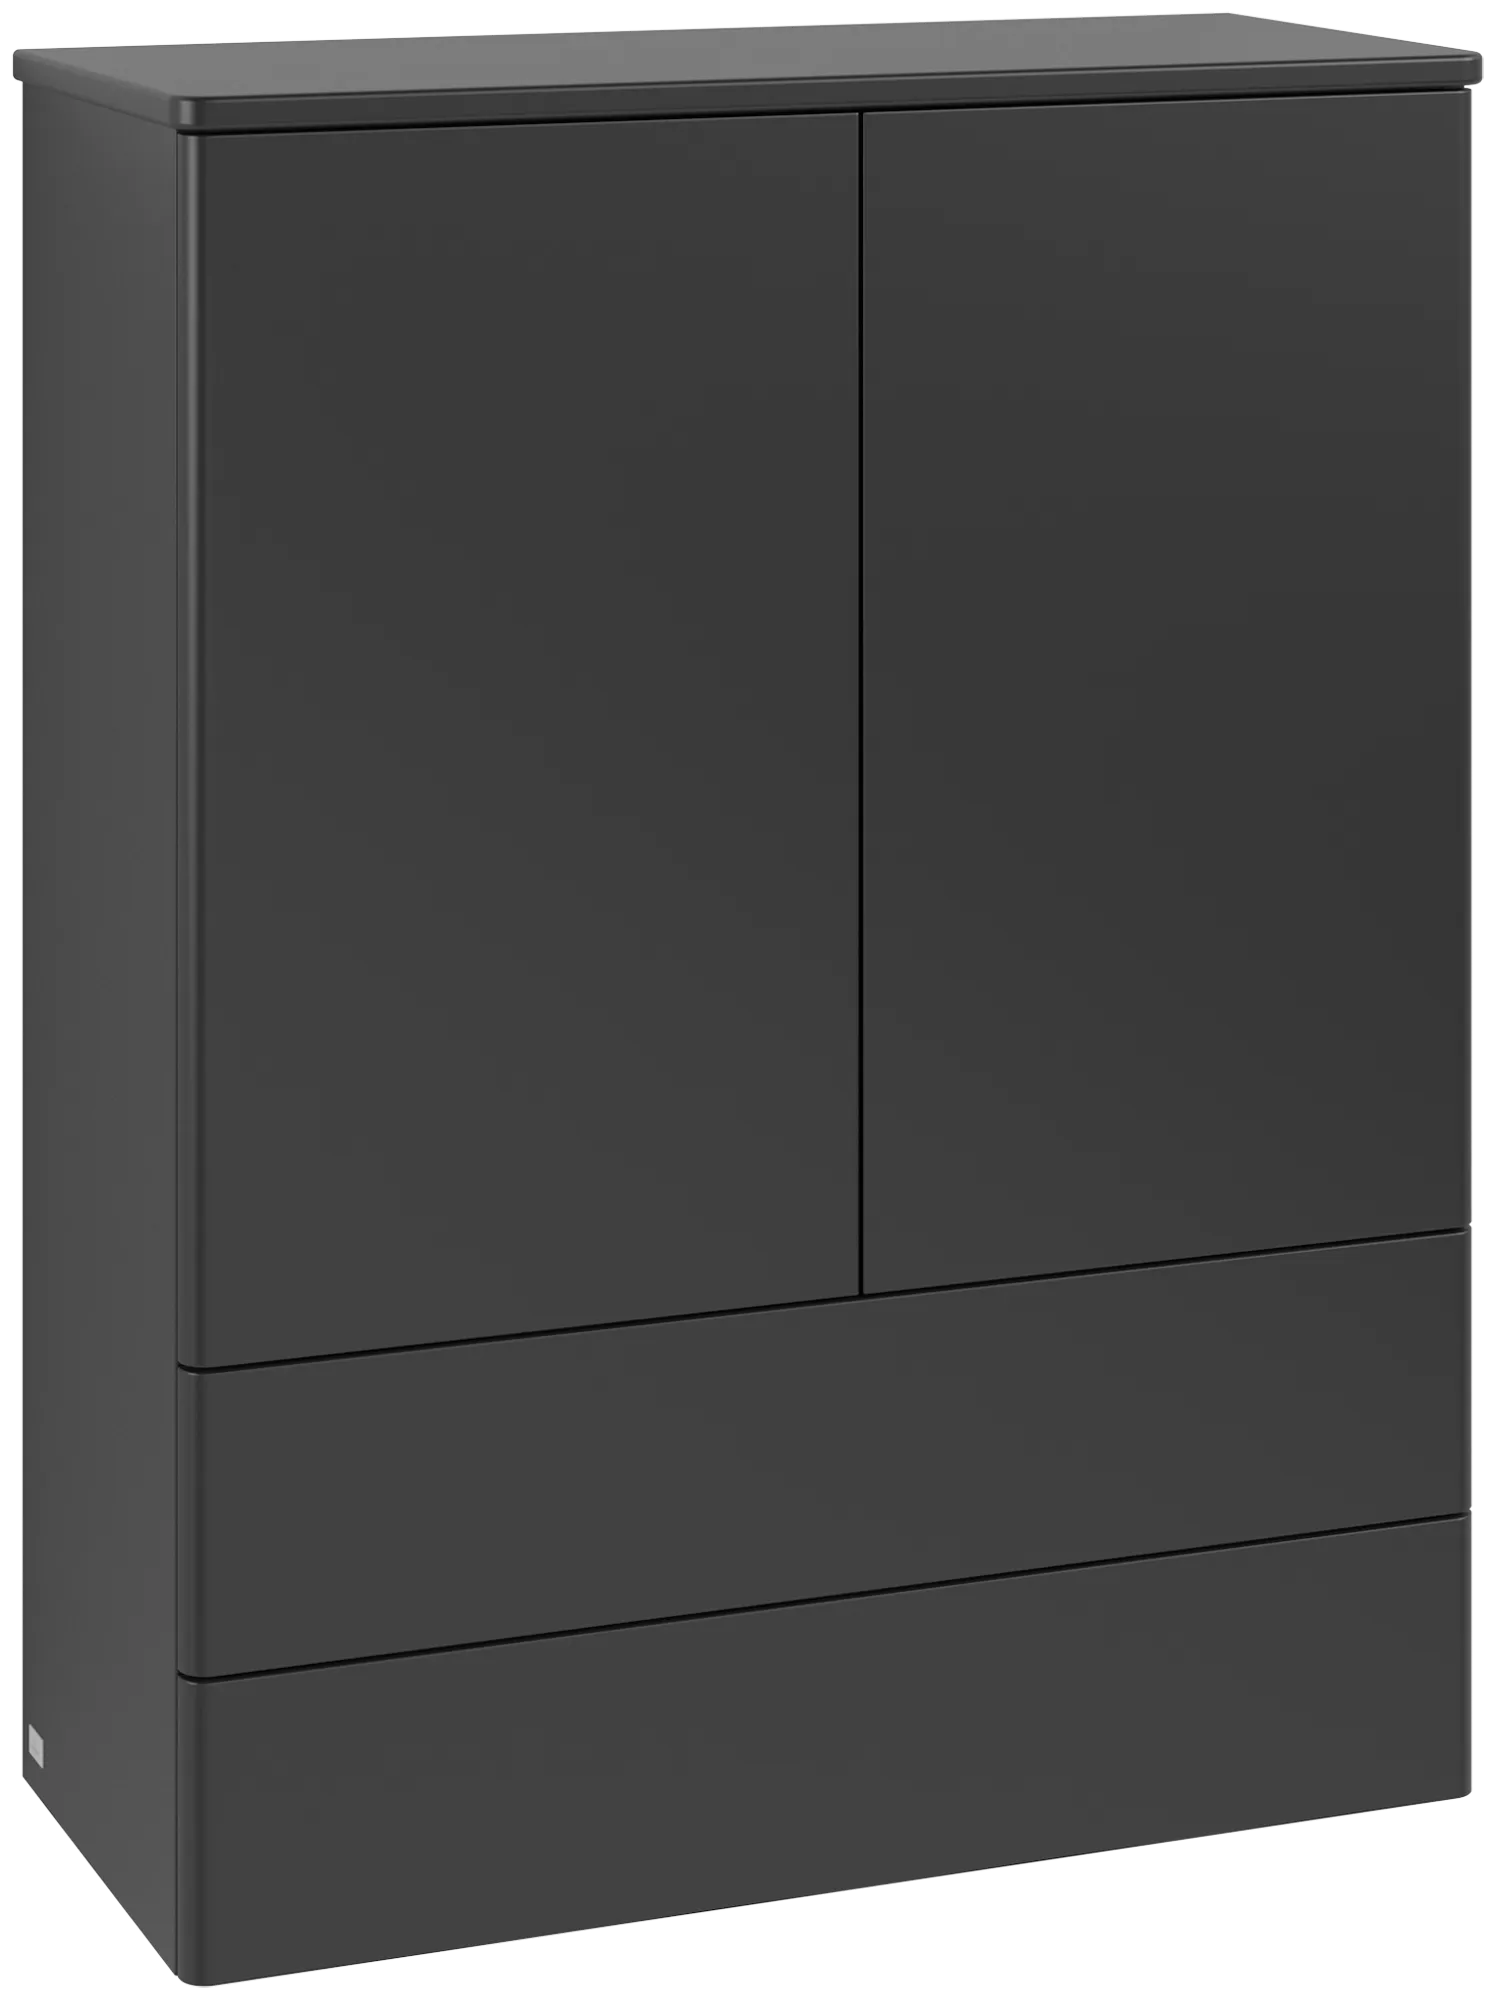 Picture of VILLEROY BOCH Antao Highboard, 2 doors, 814 x 1039 x 356 mm, Front without structure, Black Matt Lacquer / Black Matt Lacquer #K47000PD